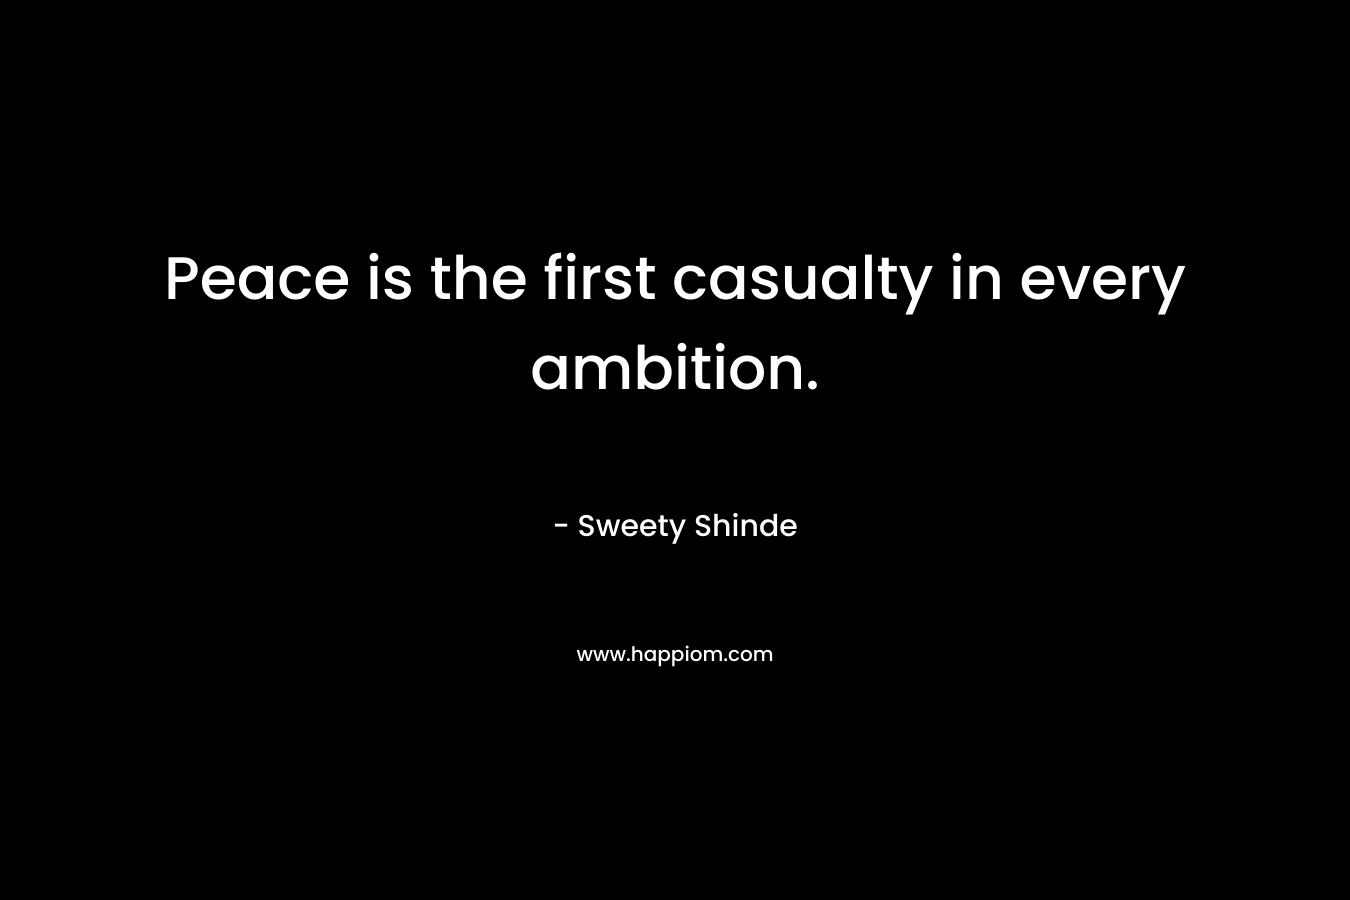 Peace is the first casualty in every ambition. – Sweety Shinde